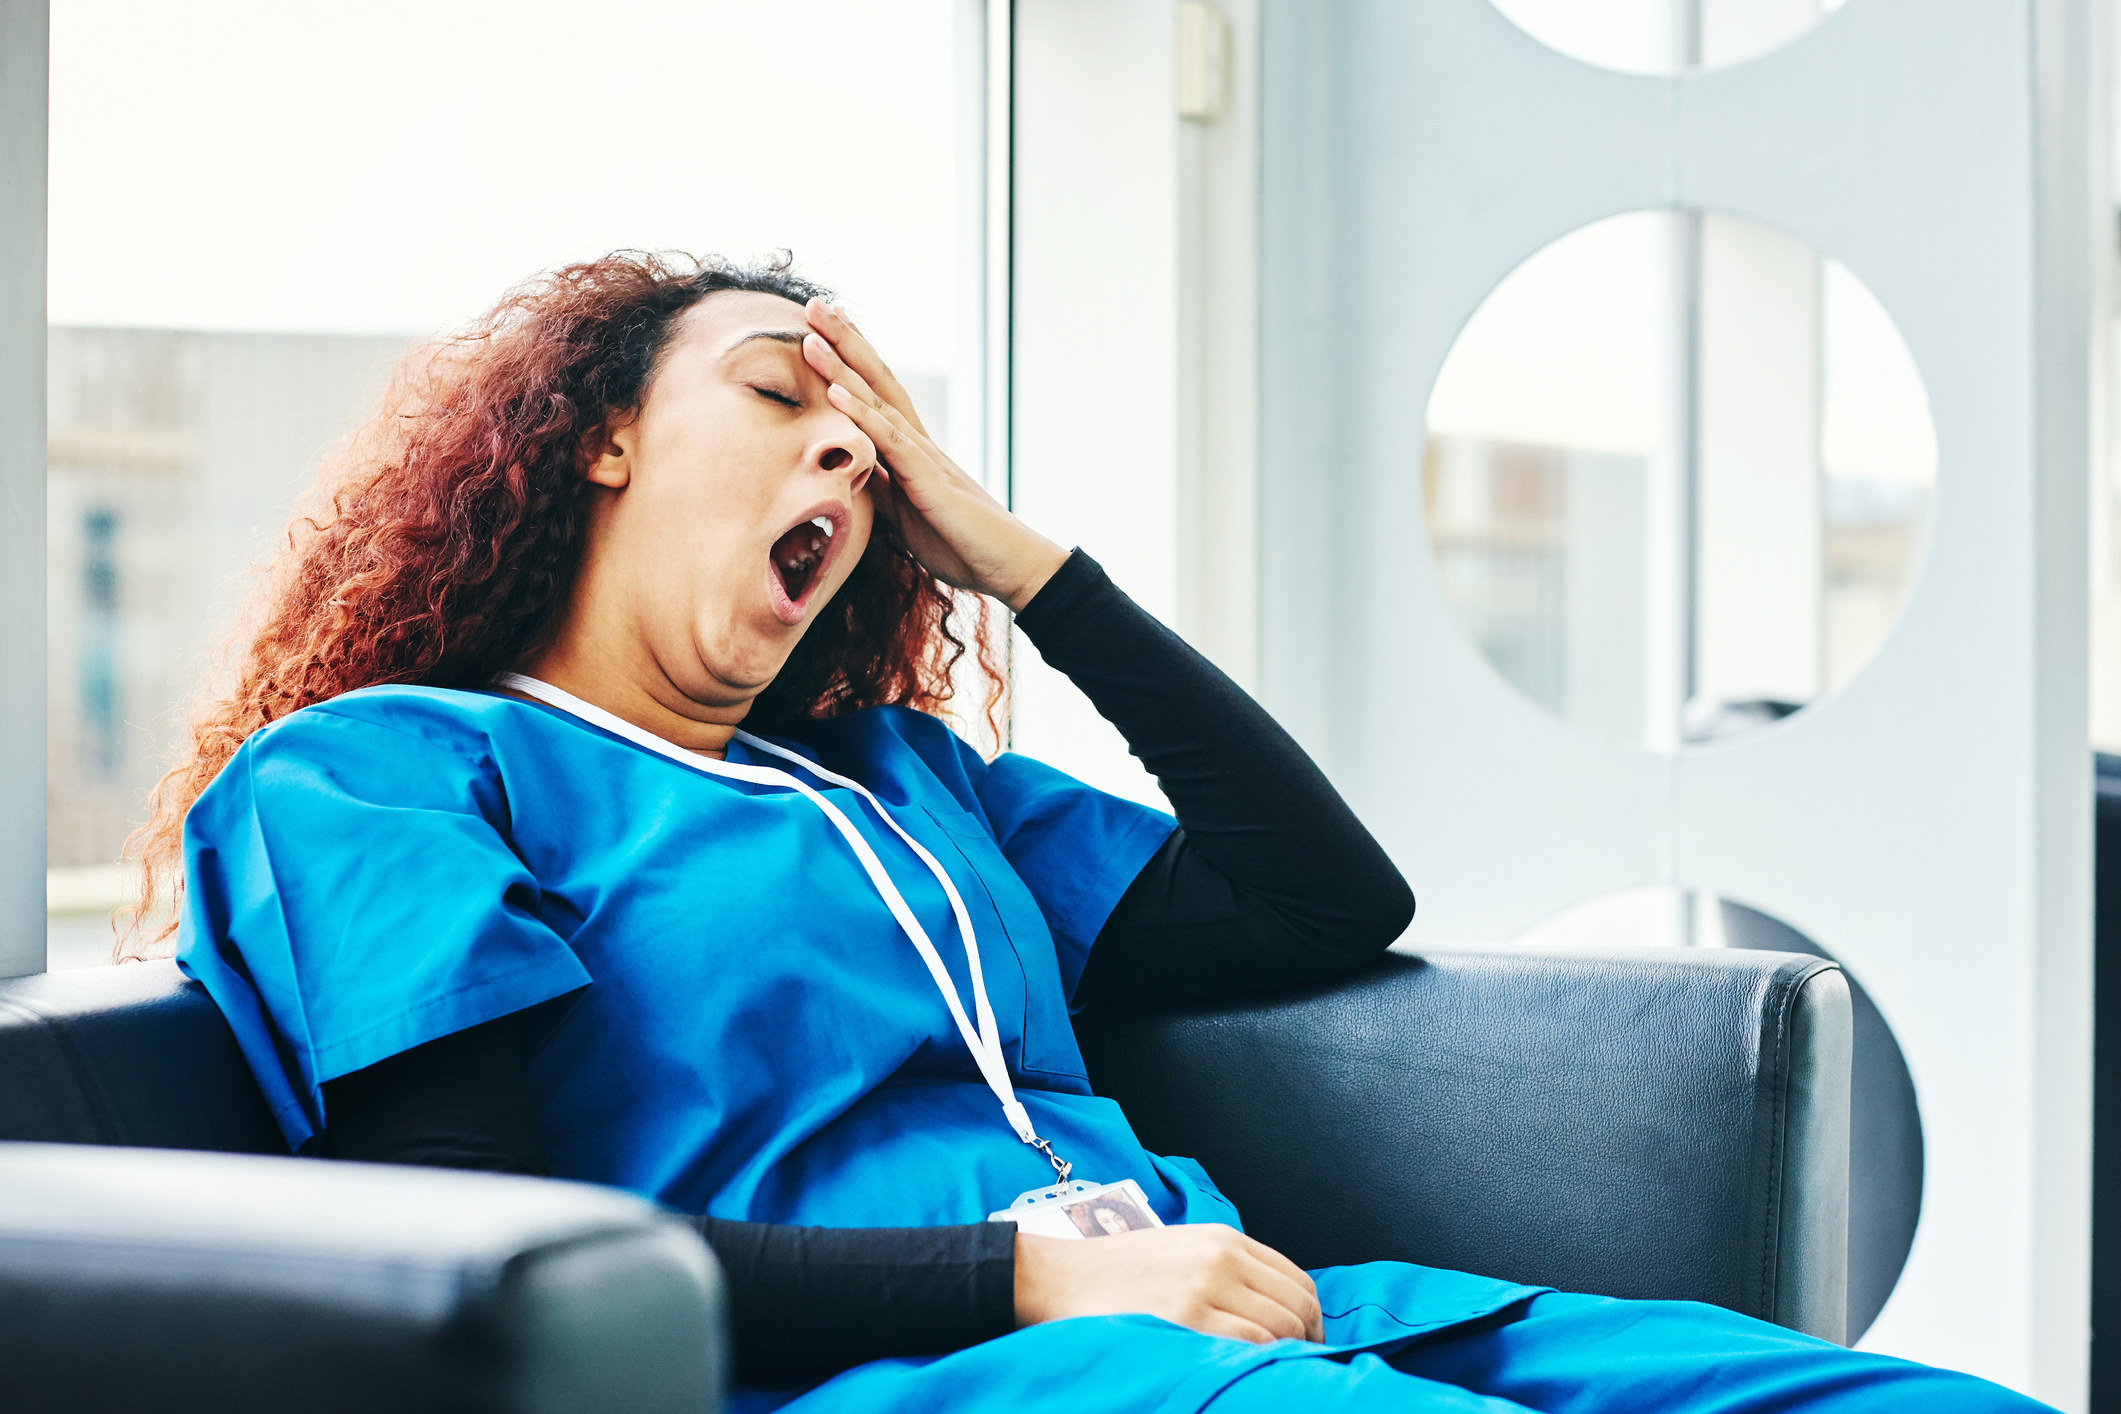 An exhausted nurse yawning